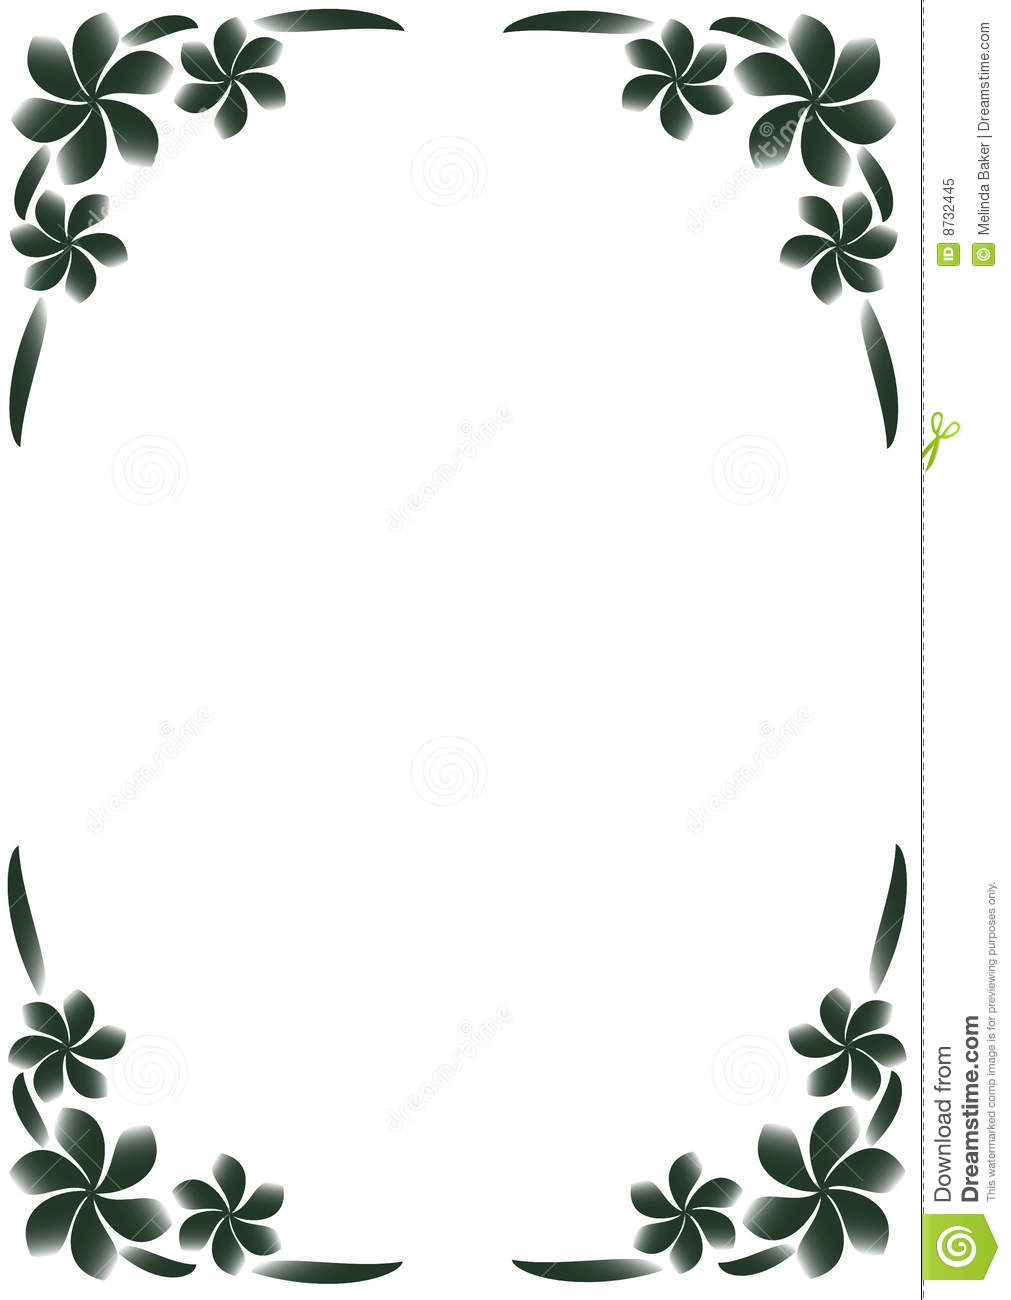 15 Black And White Floral Border Vector Free Images - Black and White